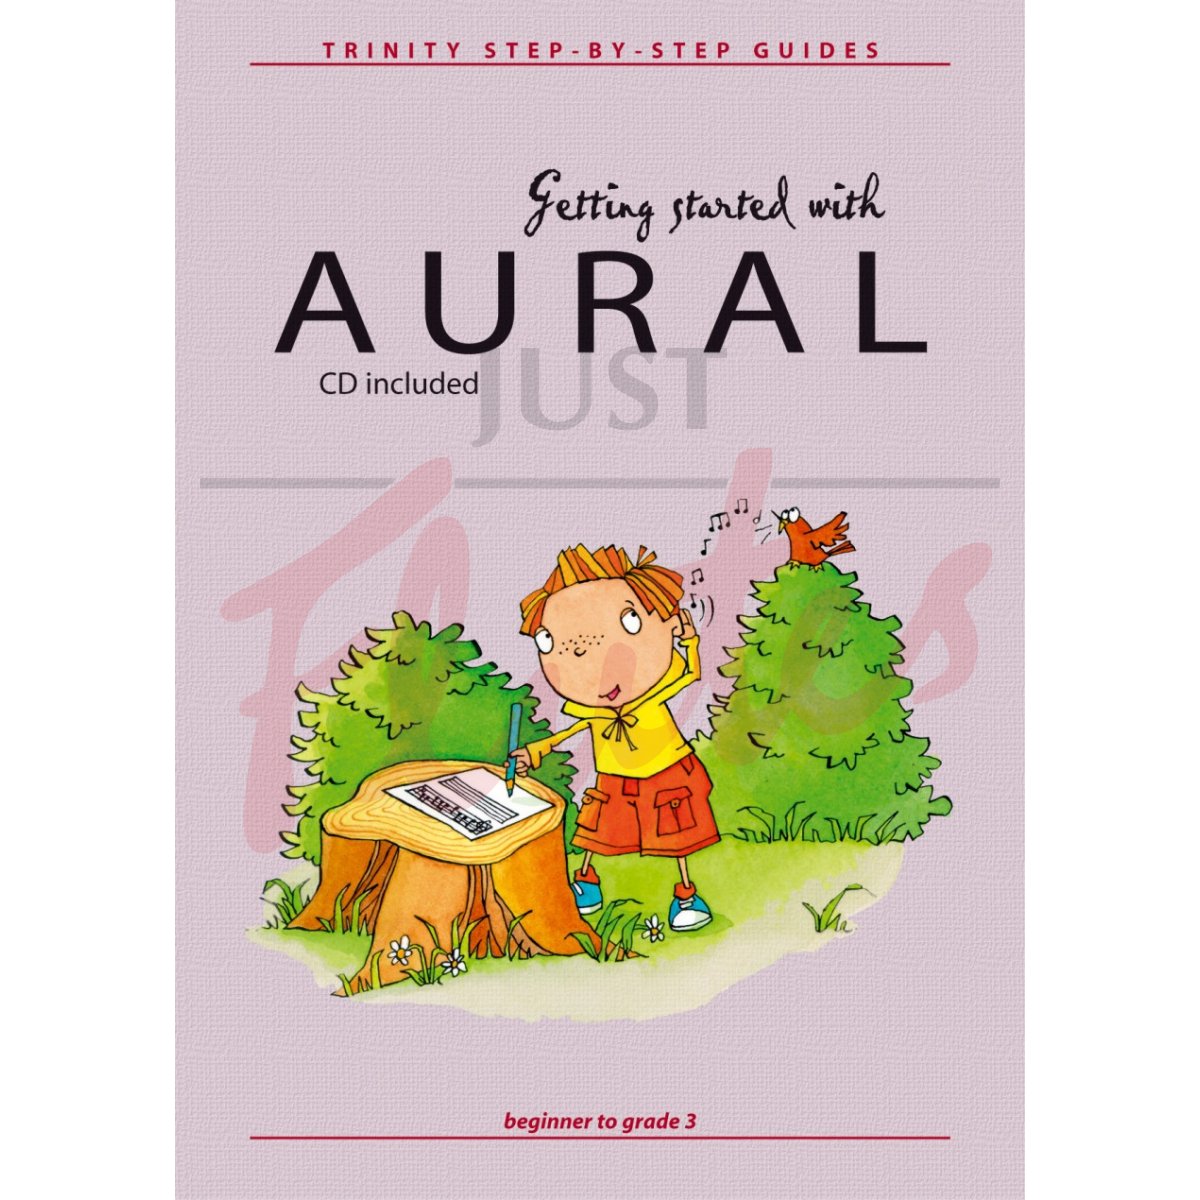 Getting Started with Aural - Beginner to Grade 3